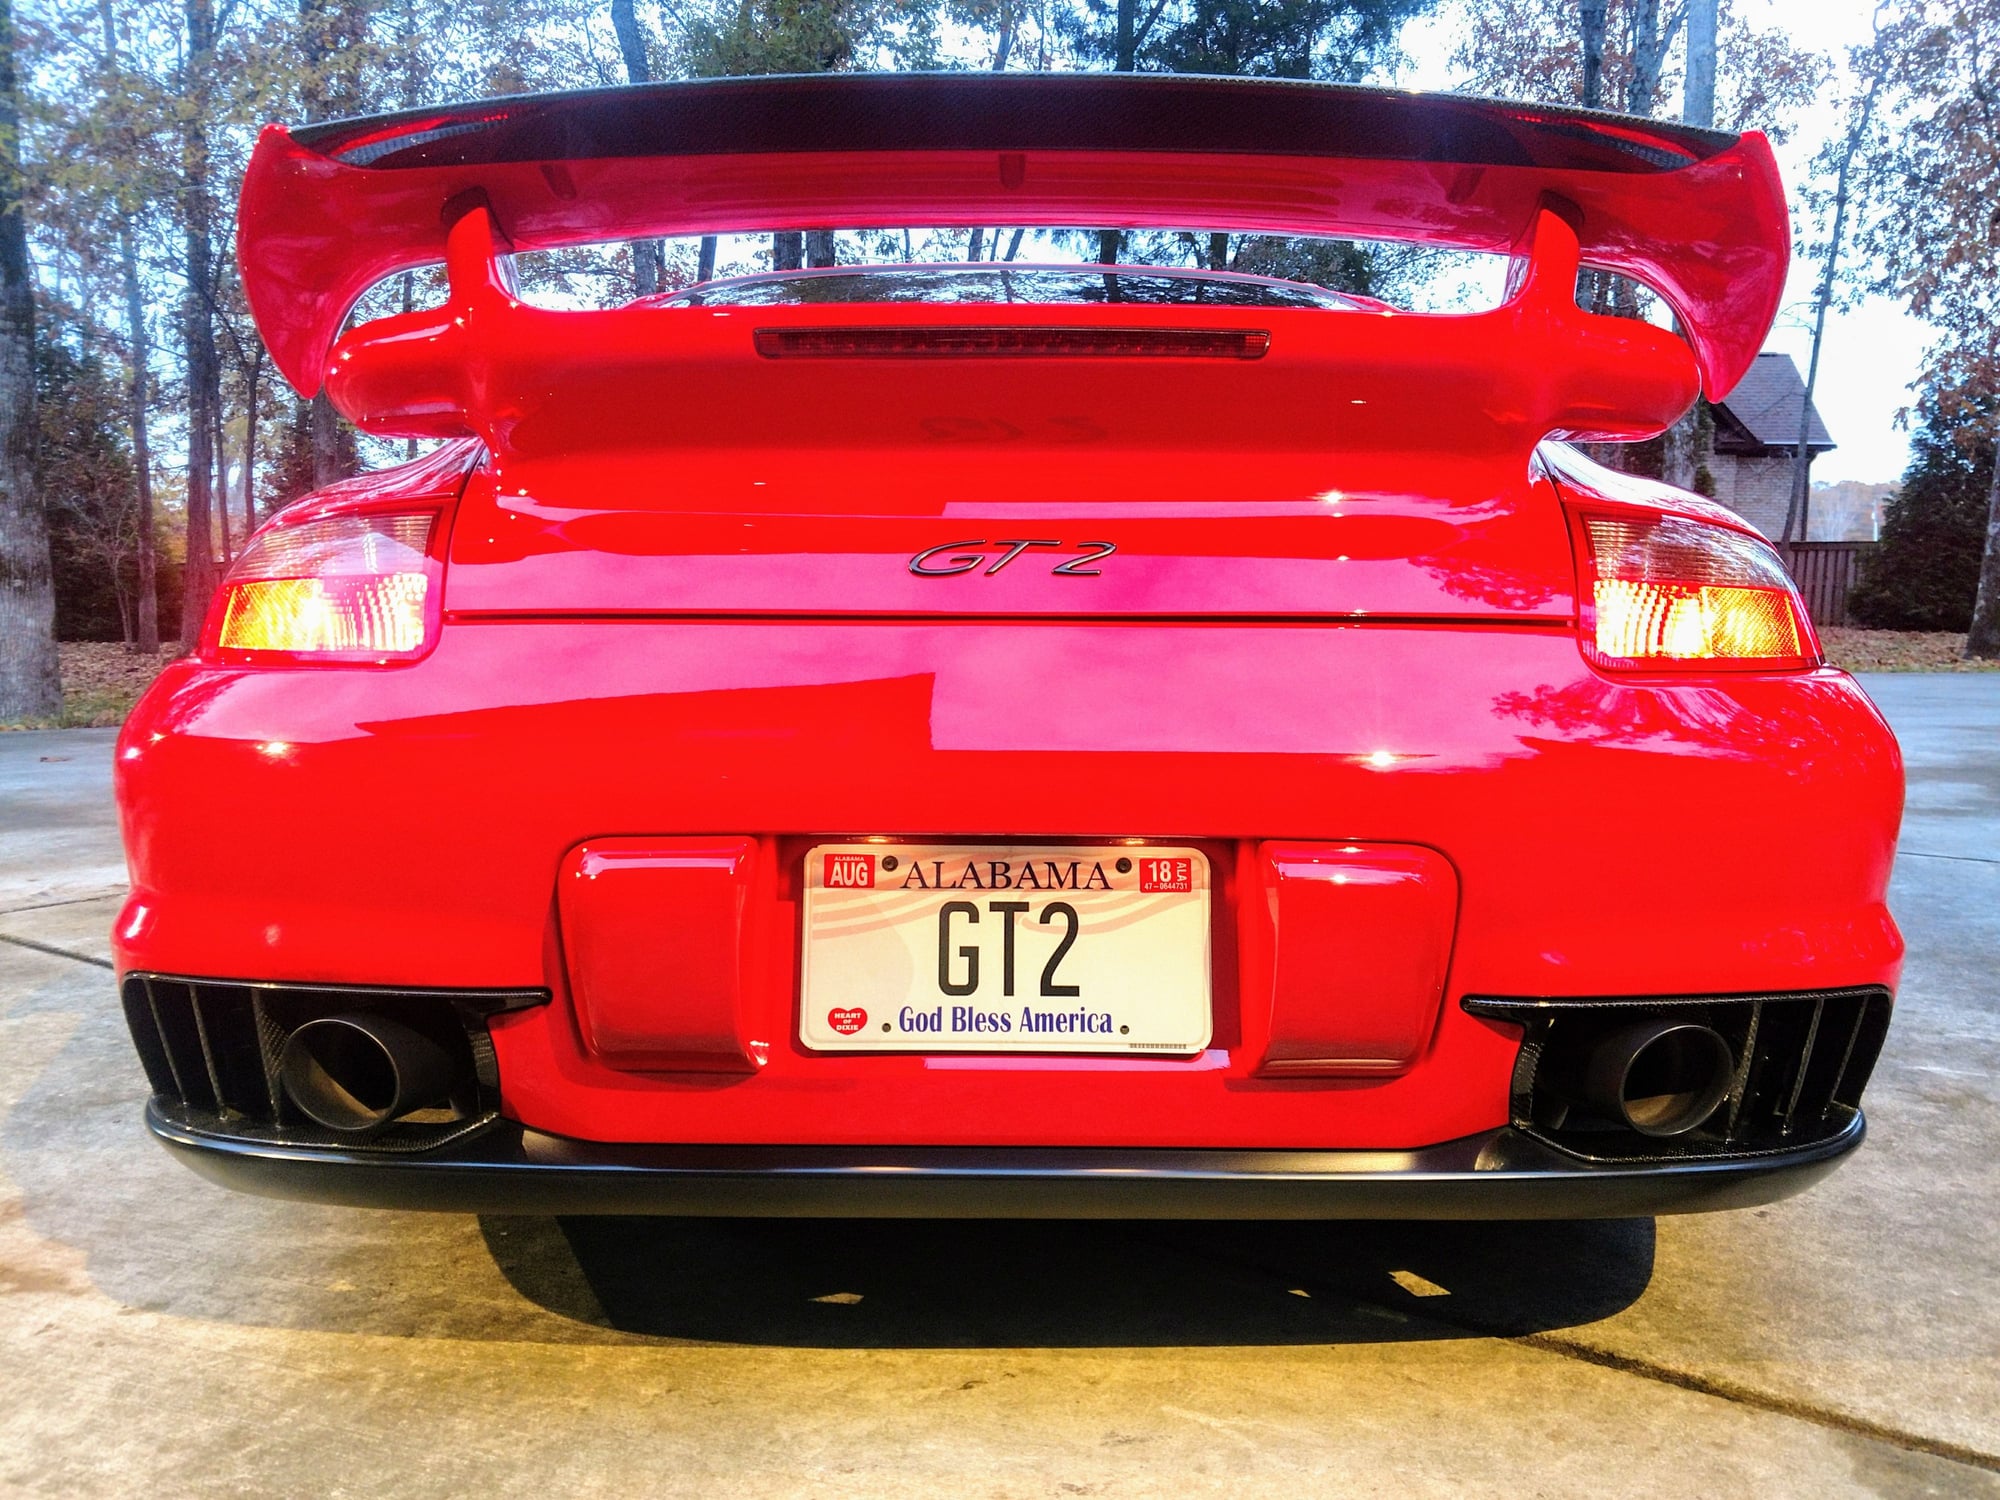 2008 Porsche GT2 - 2008 Porsche 911 GT2 - Used - VIN WP0AD29938S796250 - 16,216 Miles - 6 cyl - 2WD - Manual - Coupe - Red - New Market, AL 35761, United States